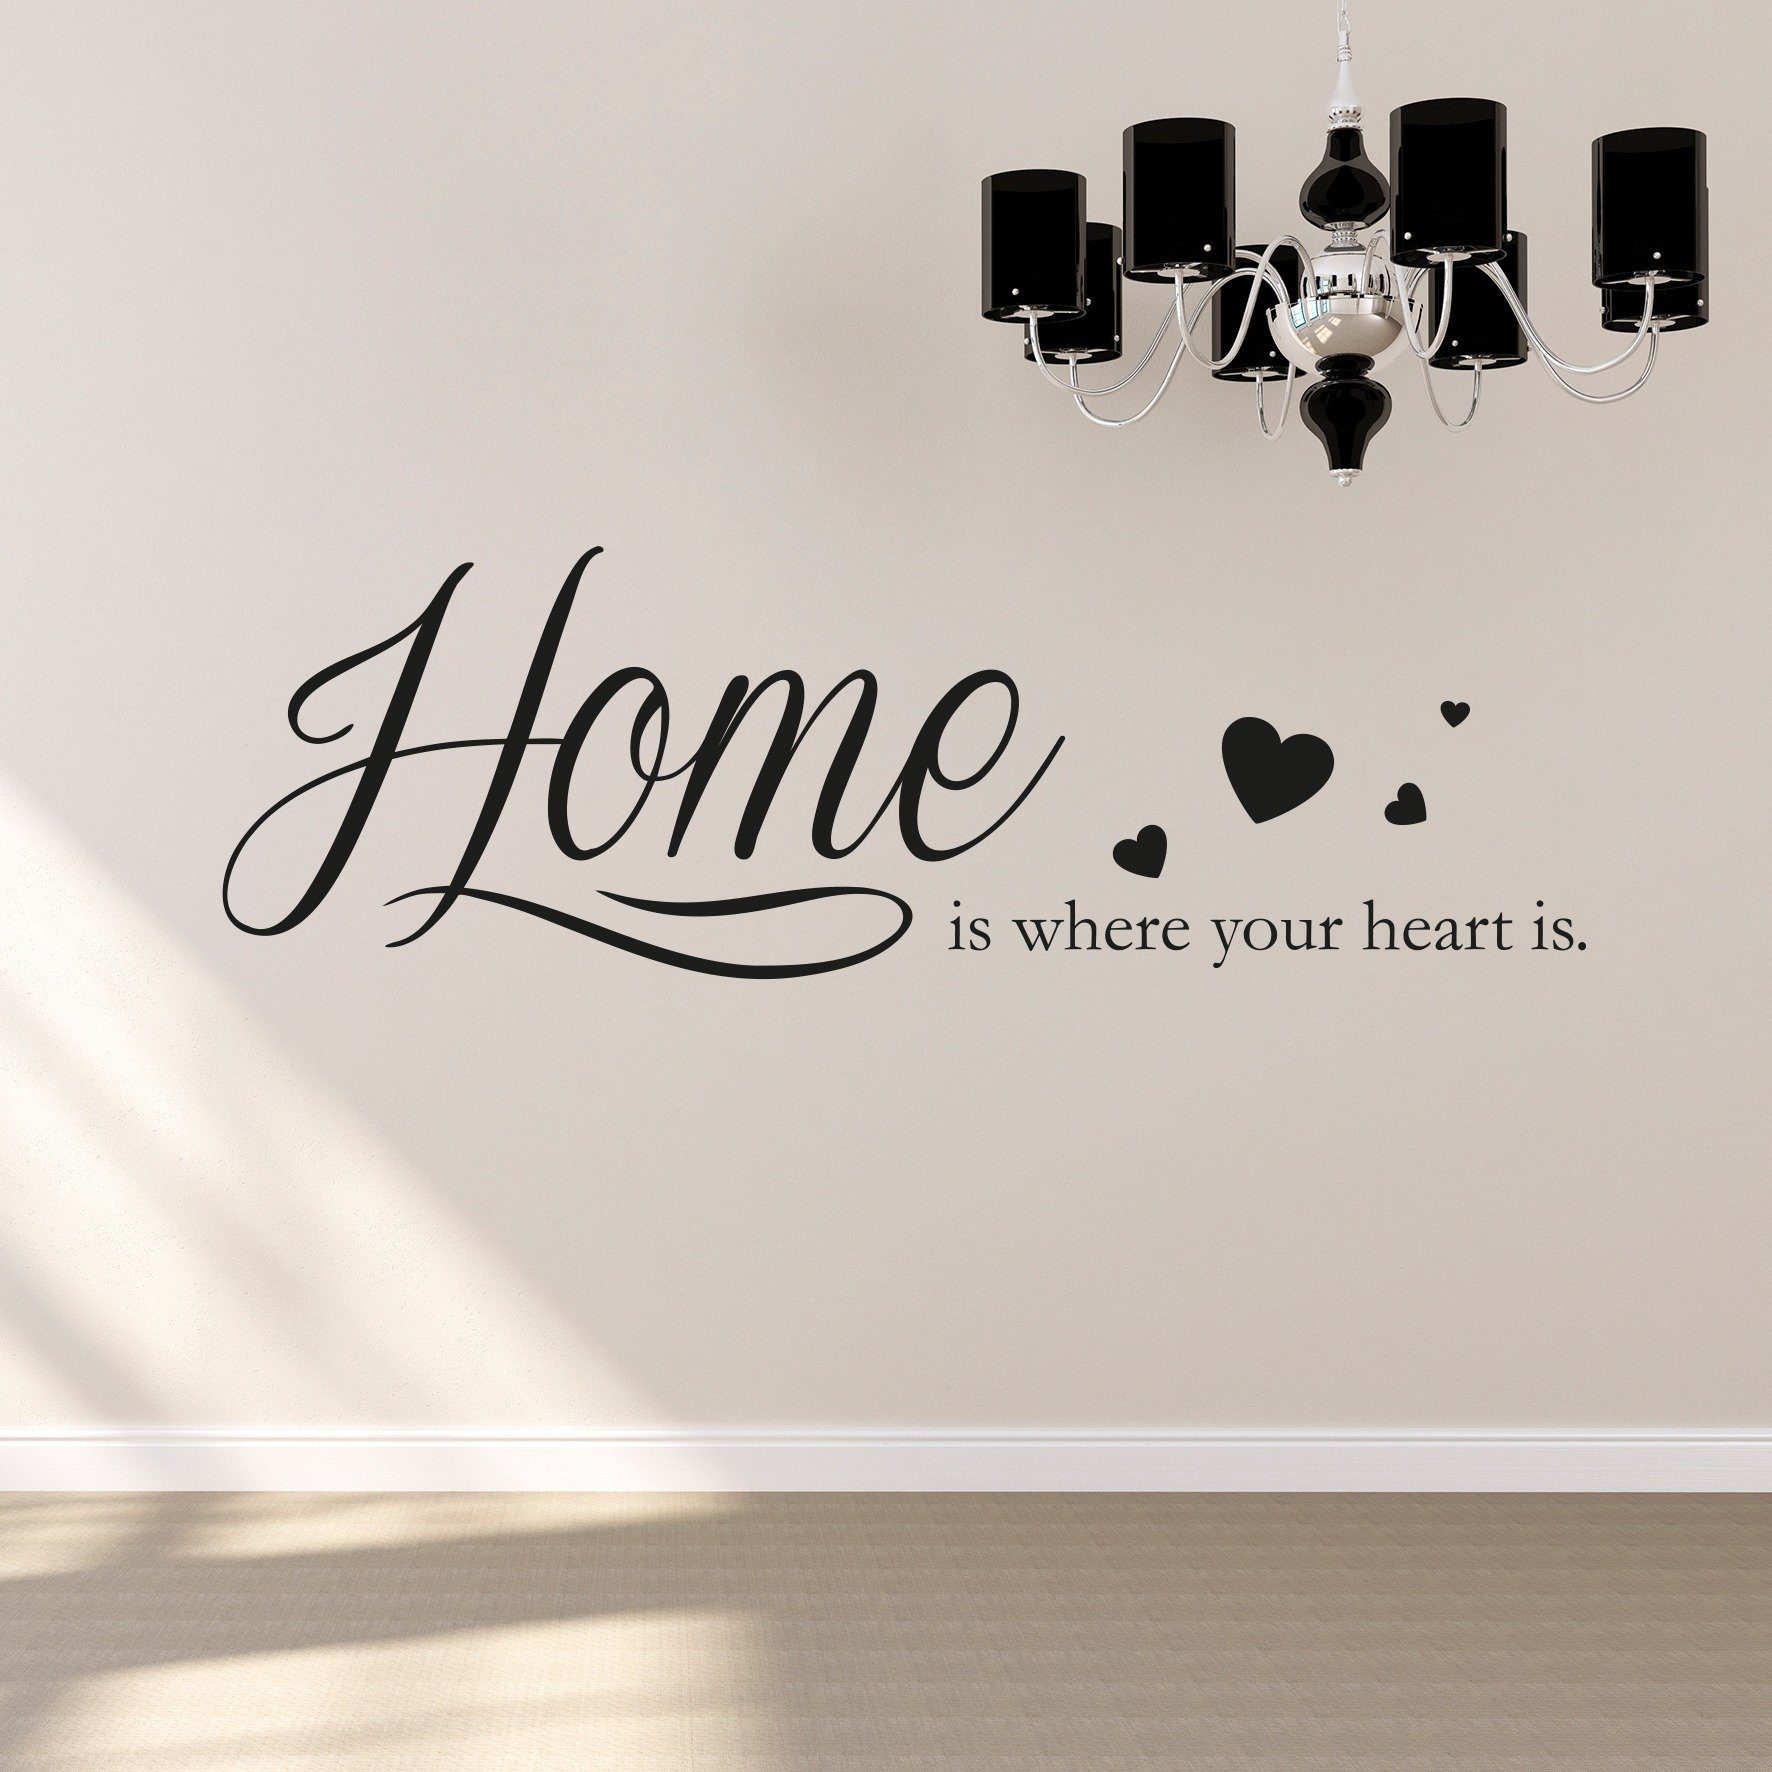 queence Wandtattoo Home is where your heart is, 120 x 30 cm | Wandtattoos